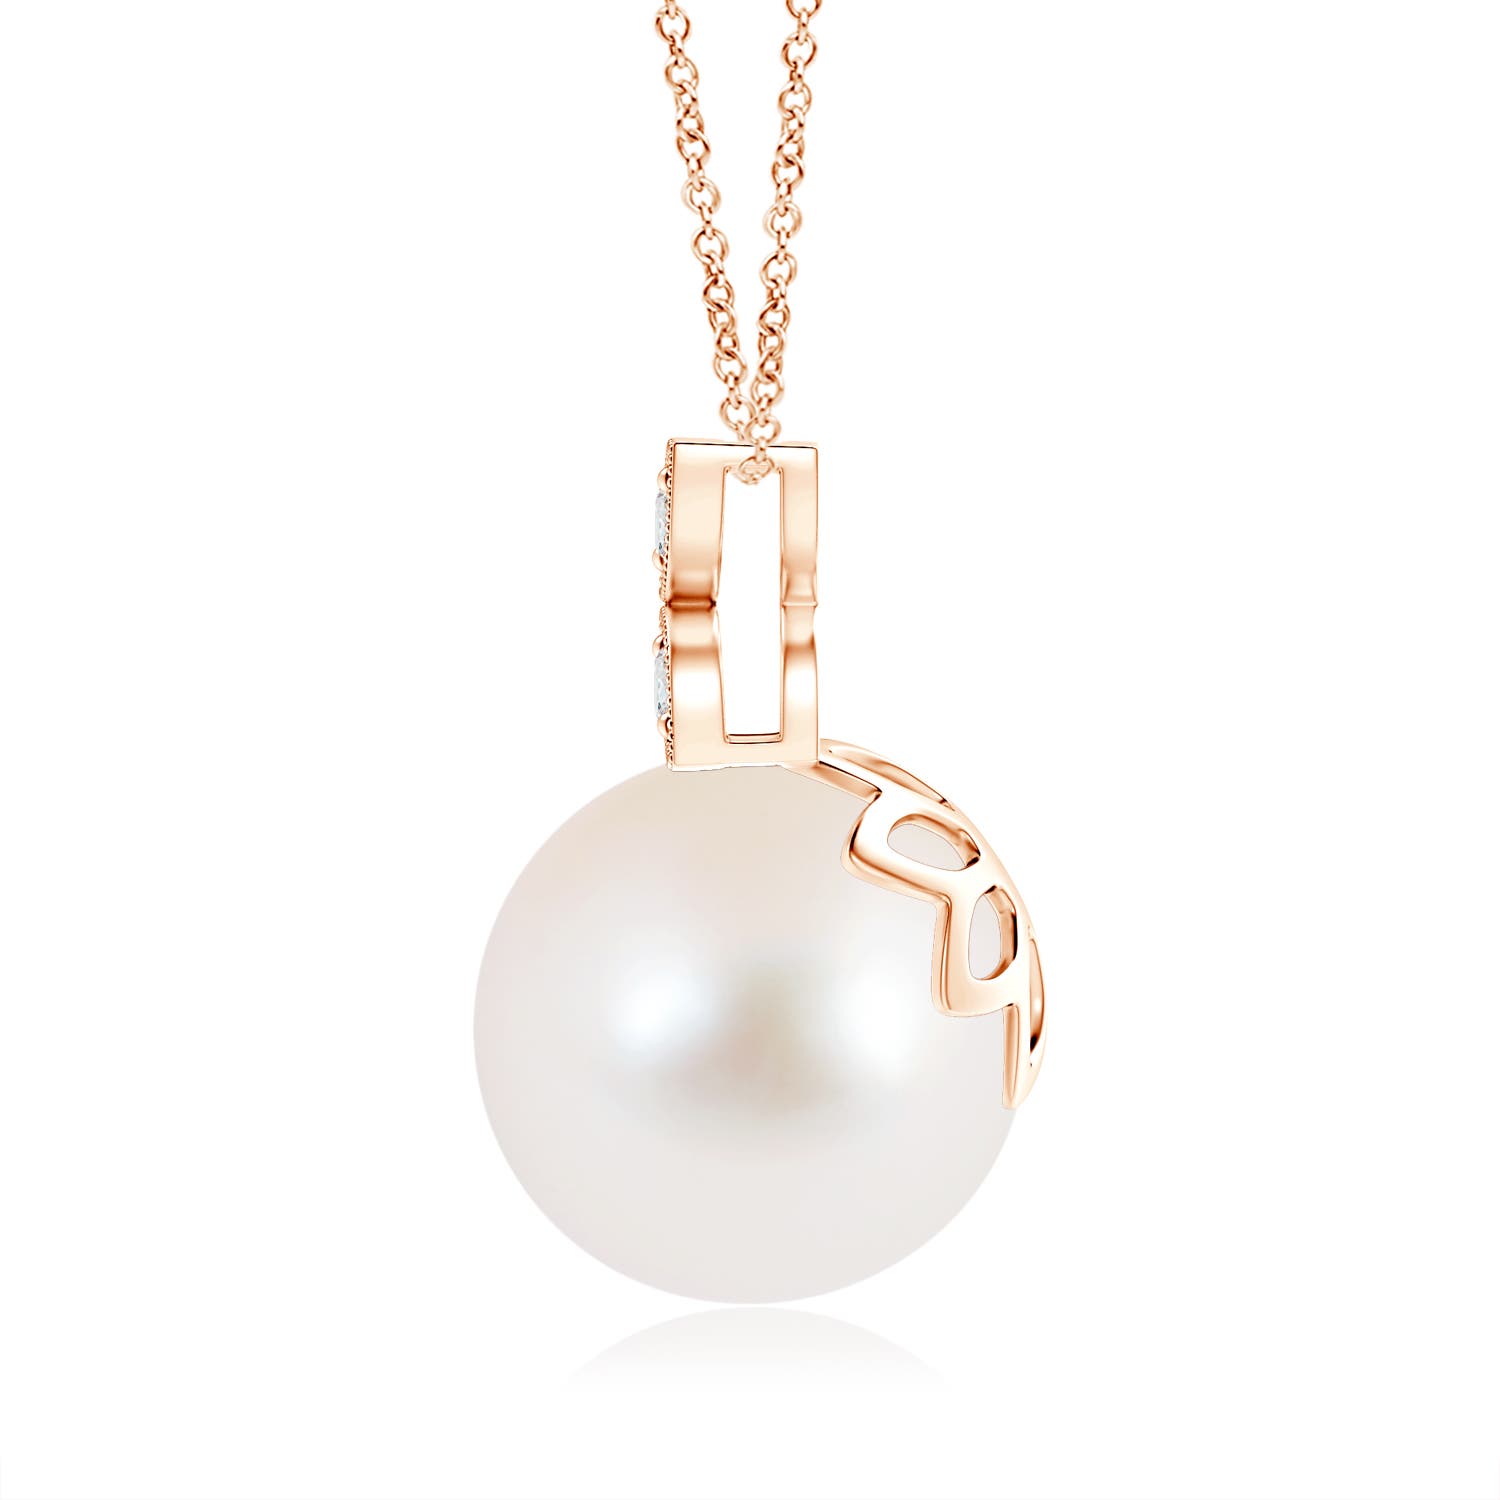 AAA - Freshwater Cultured Pearl / 7.3 CT / 14 KT Rose Gold